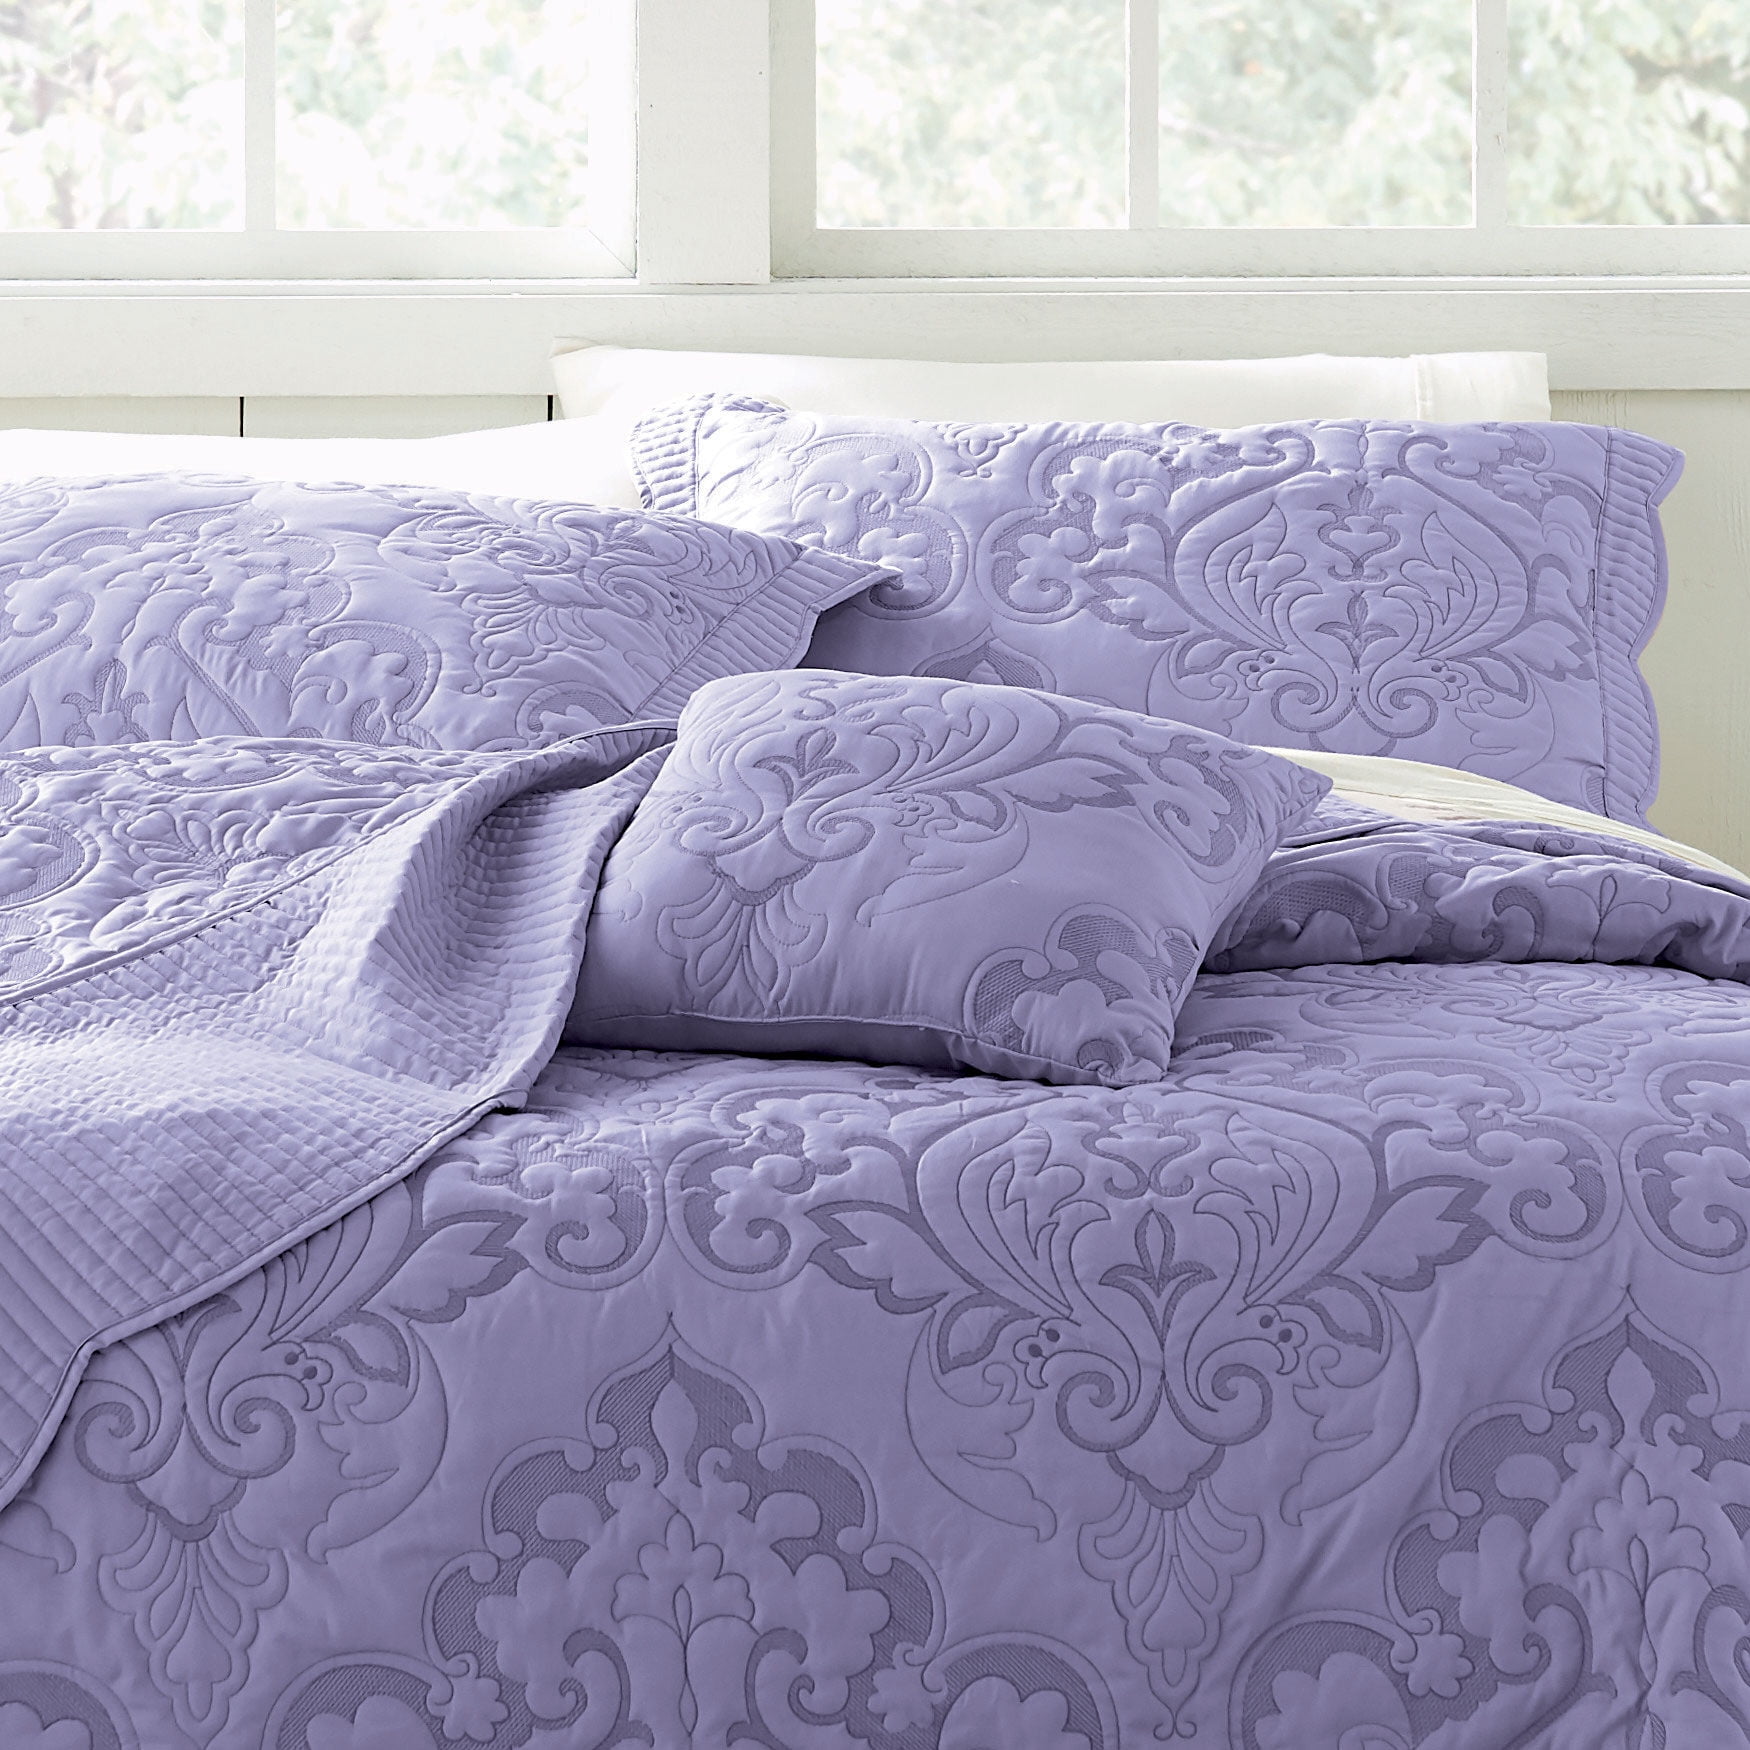 BrylaneHome Amelia Quilted Damask Oversized Ultra Soft Bedspread 